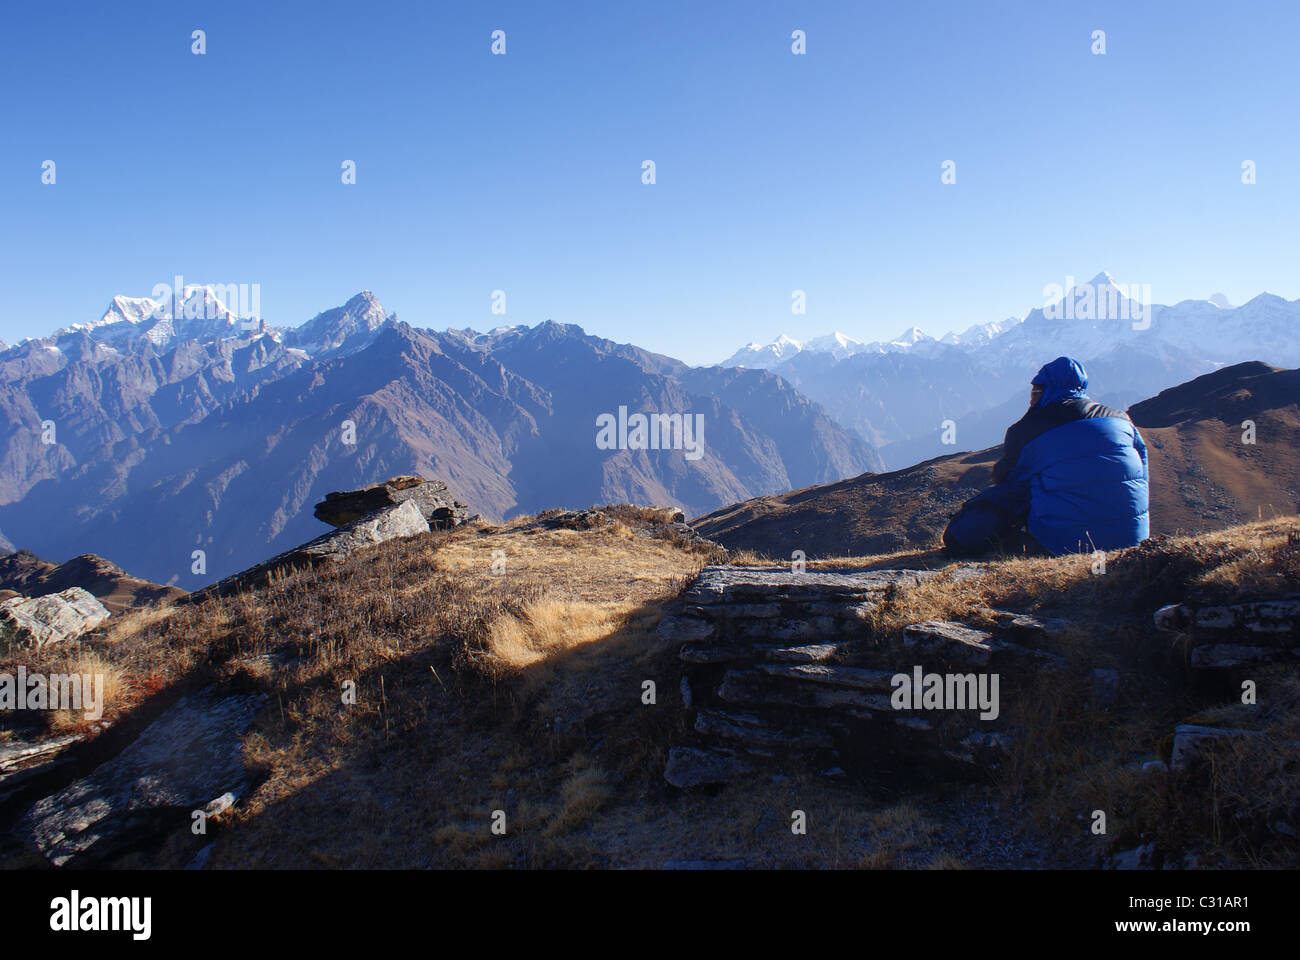 Garhwal Himalayas, India: The scene from the Kuari Pass, one of the most famous viewpoints in the Himalayas. Stock Photo